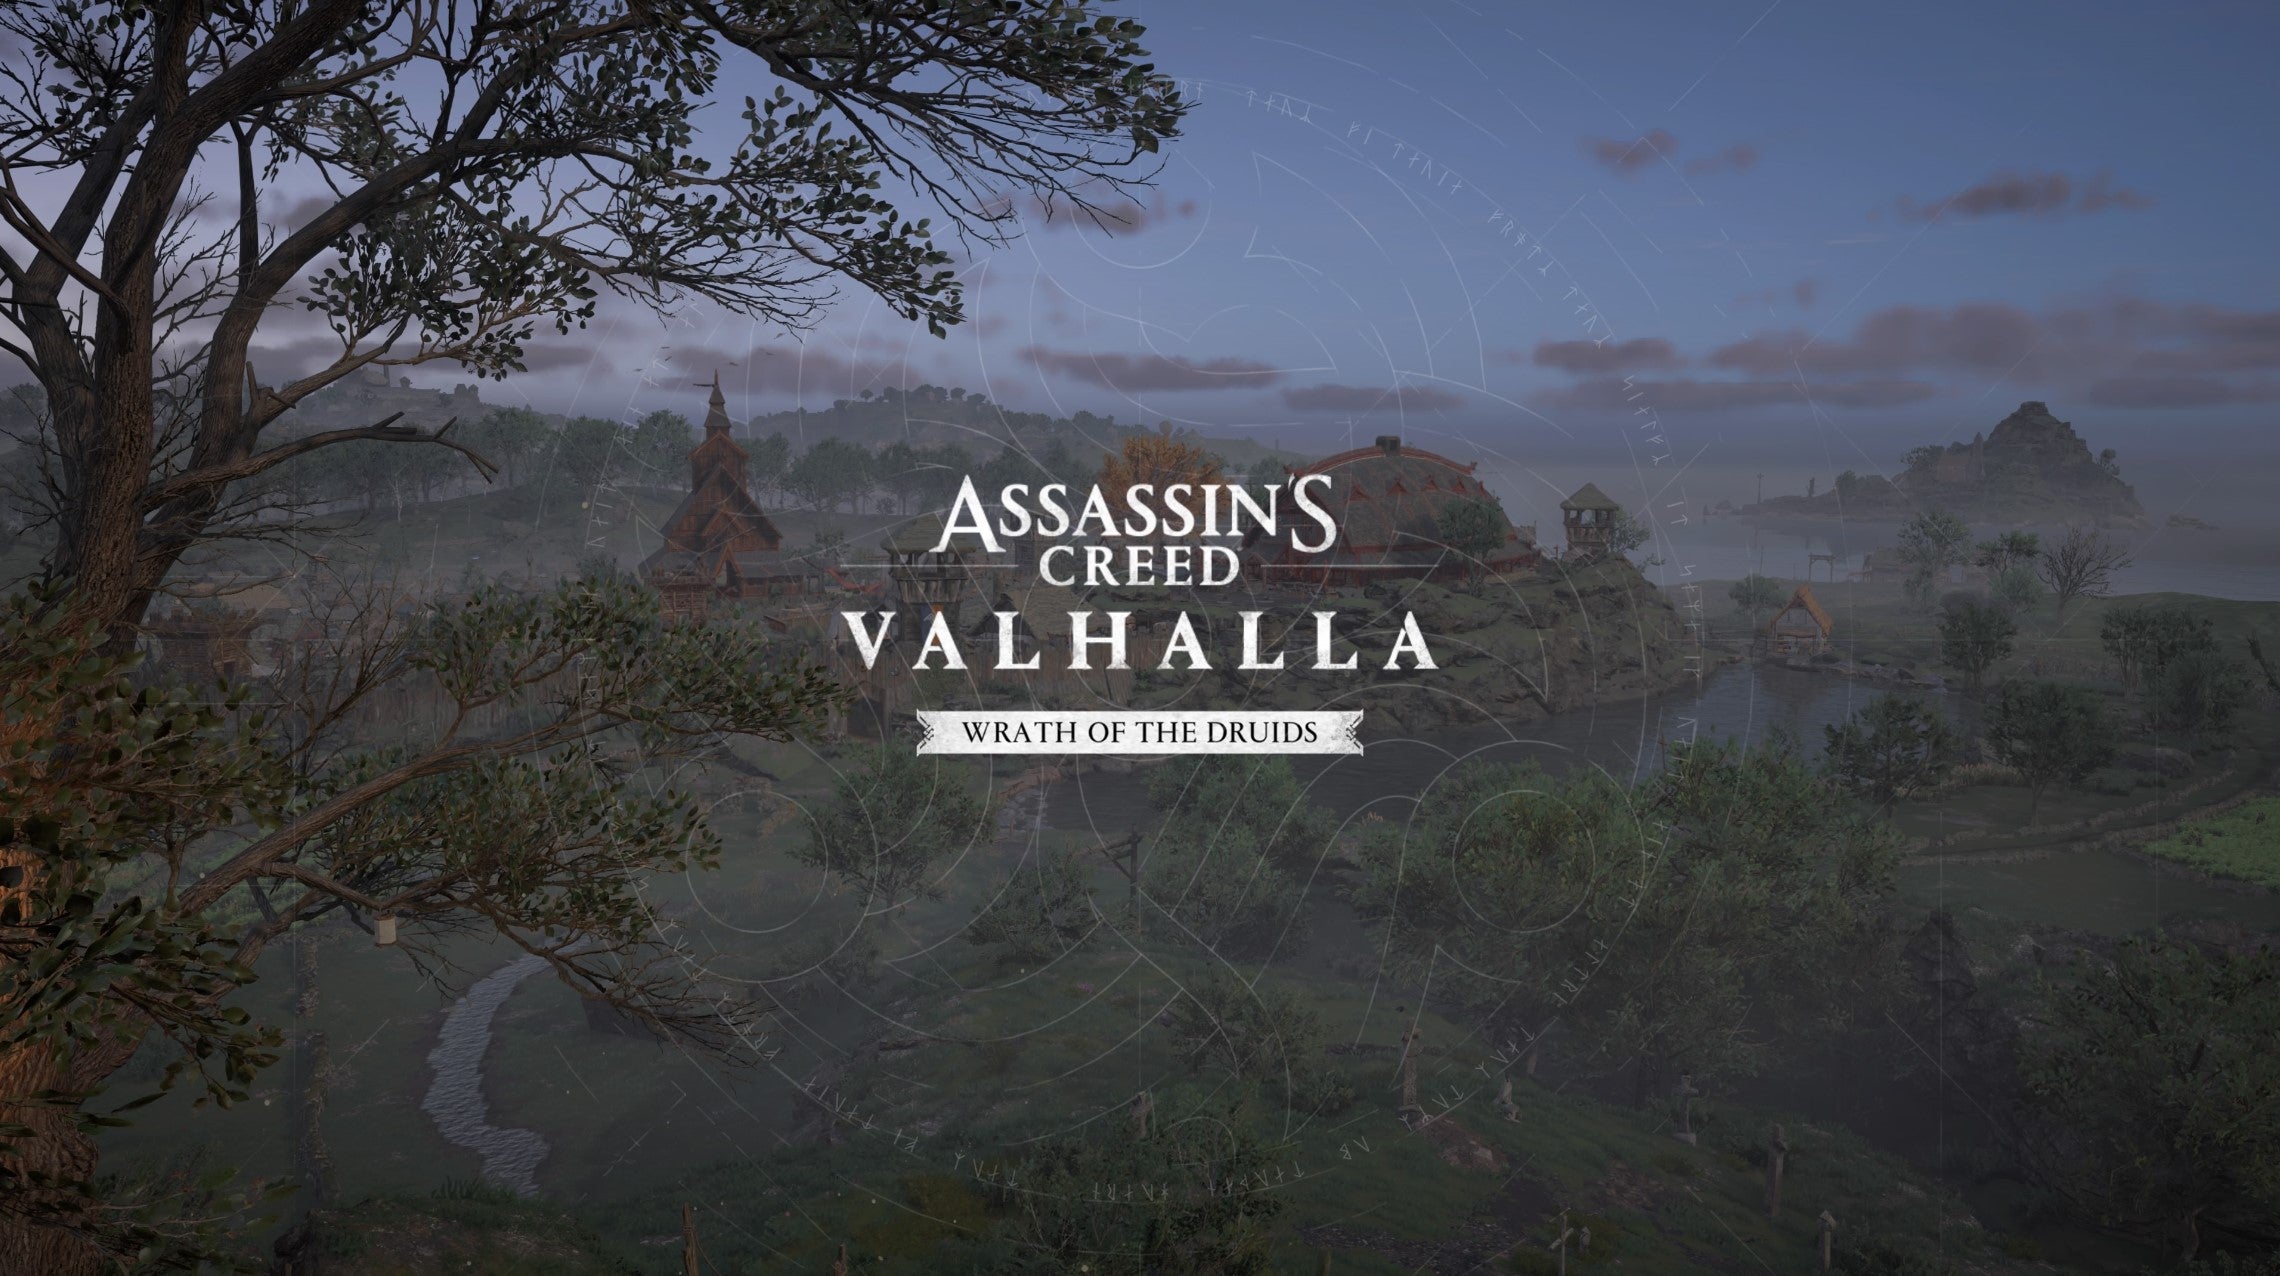 Image for Assassin's Creed Valhalla | Should you kill or spare Ciara?